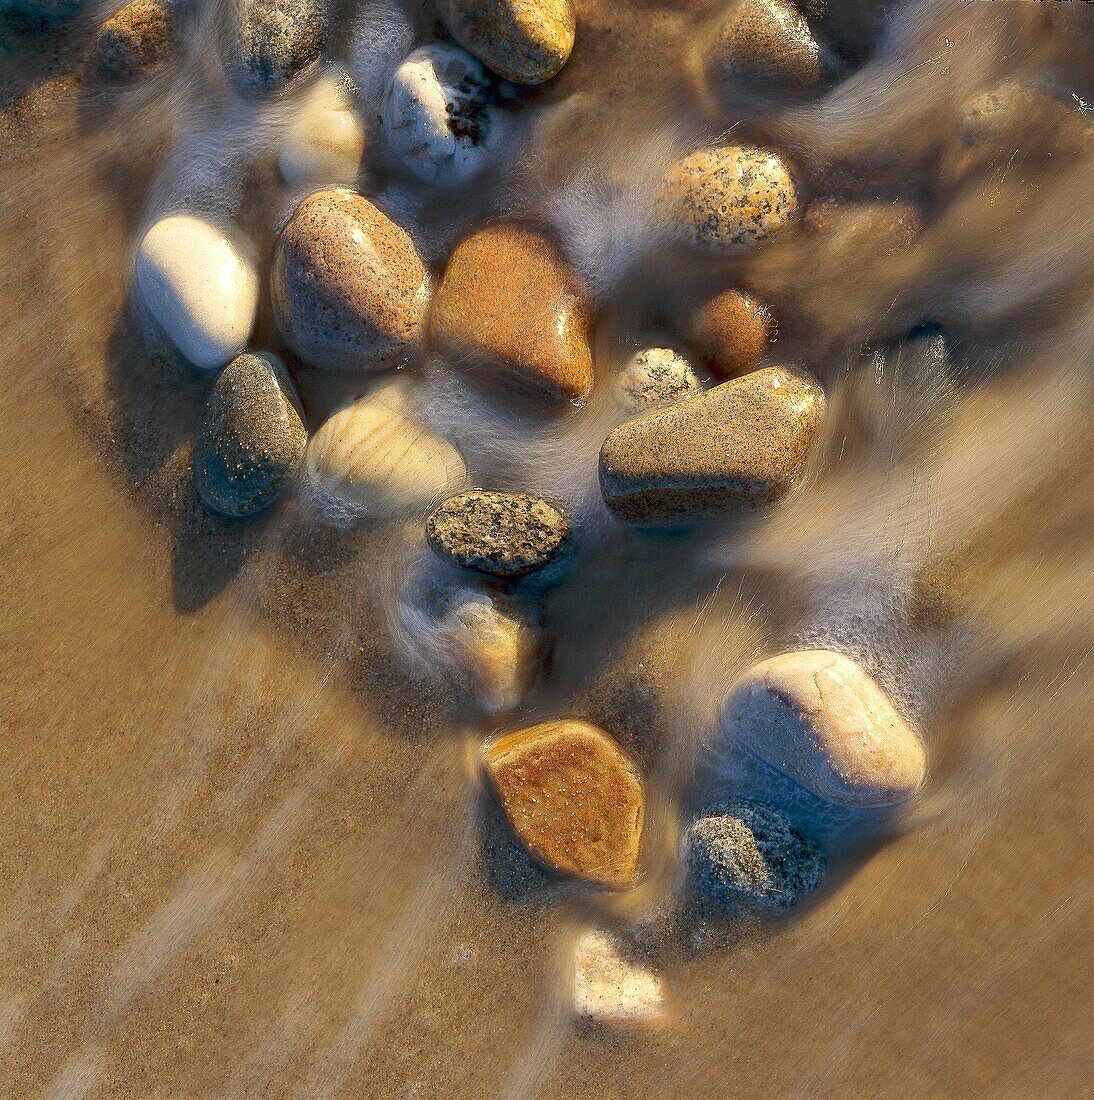 Small stones in water´s edge